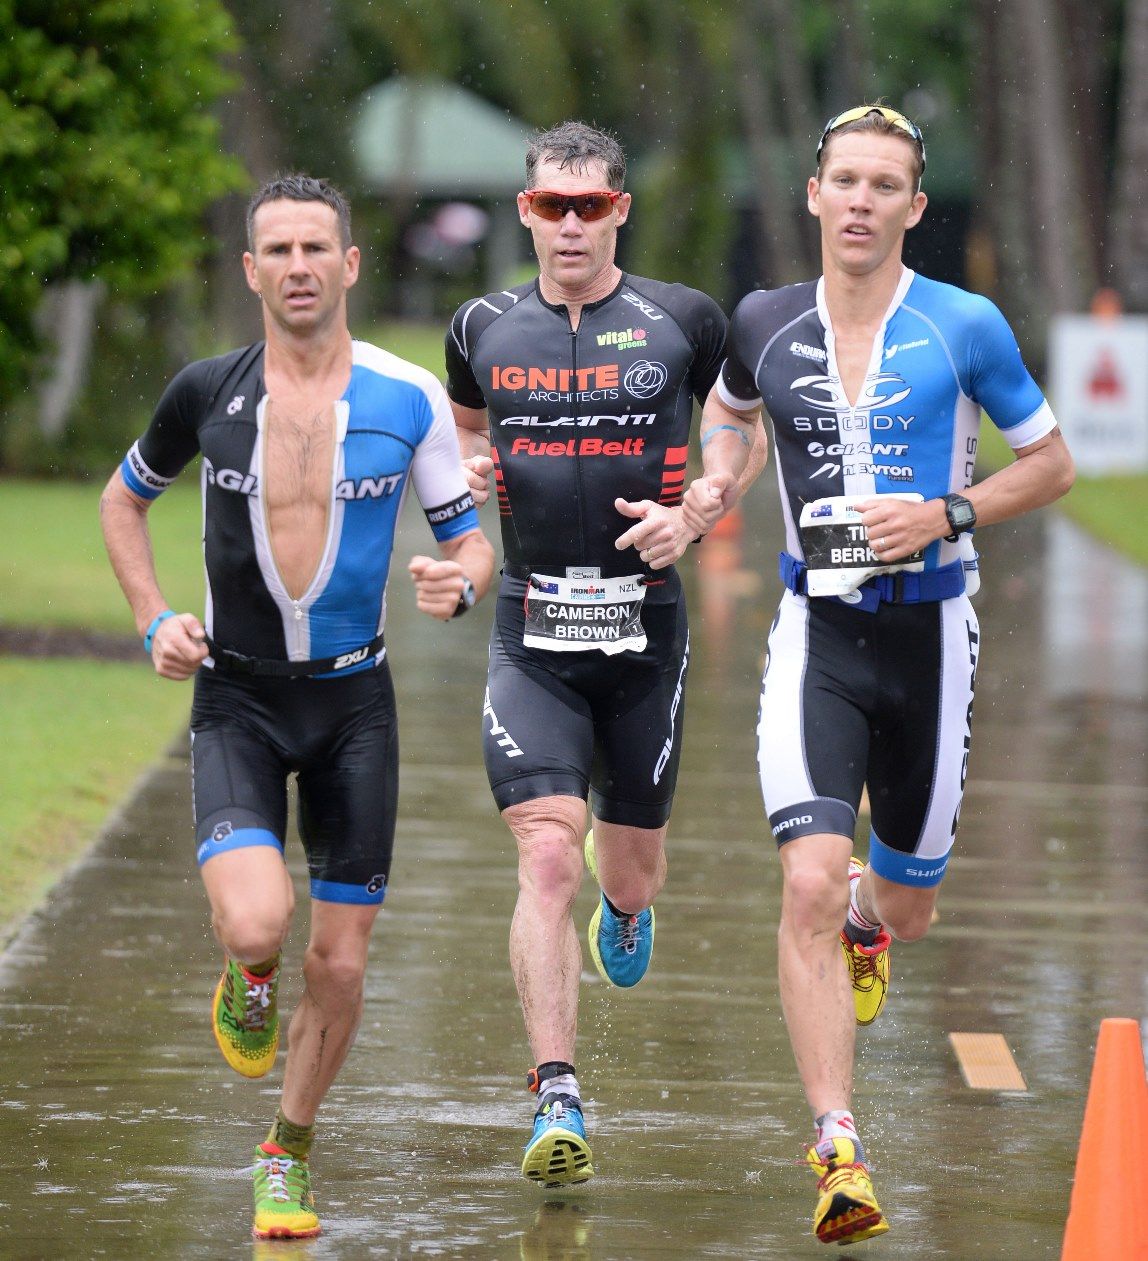 Cameron Brown produces legendary performance to win 2014 Ironman Cairns